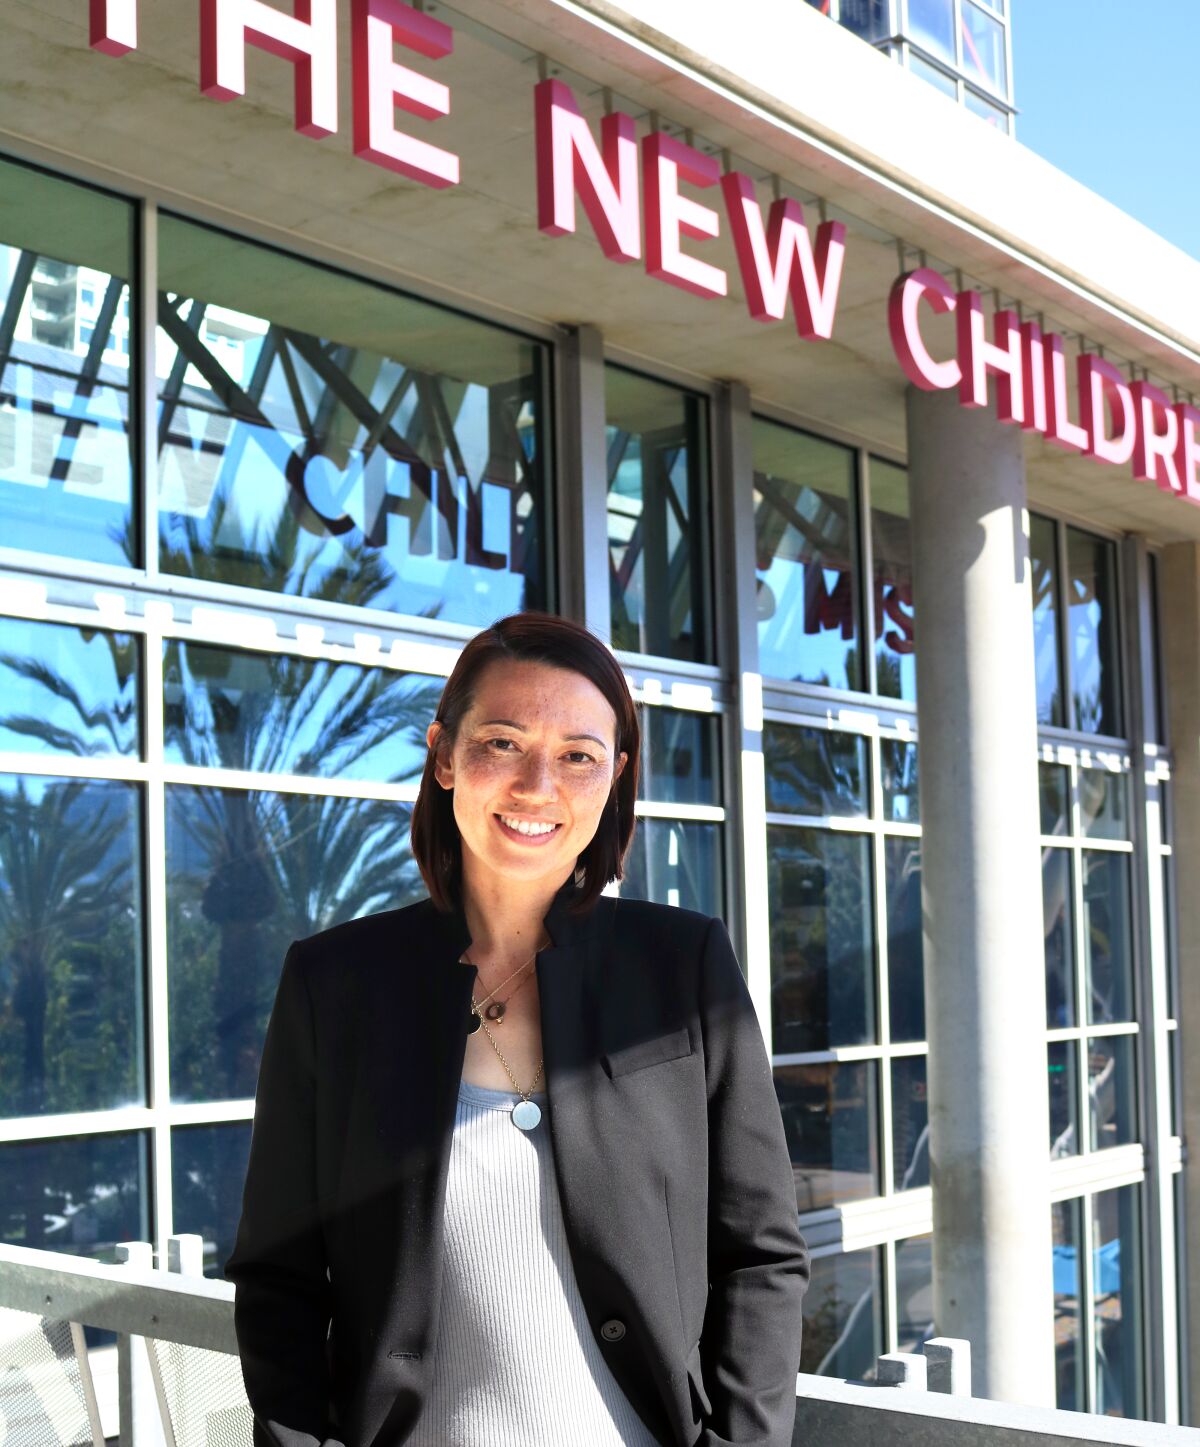 Elizabeth Yang-Hellewell is the new executive director and CEO of the New Children's Museum in San Diego.